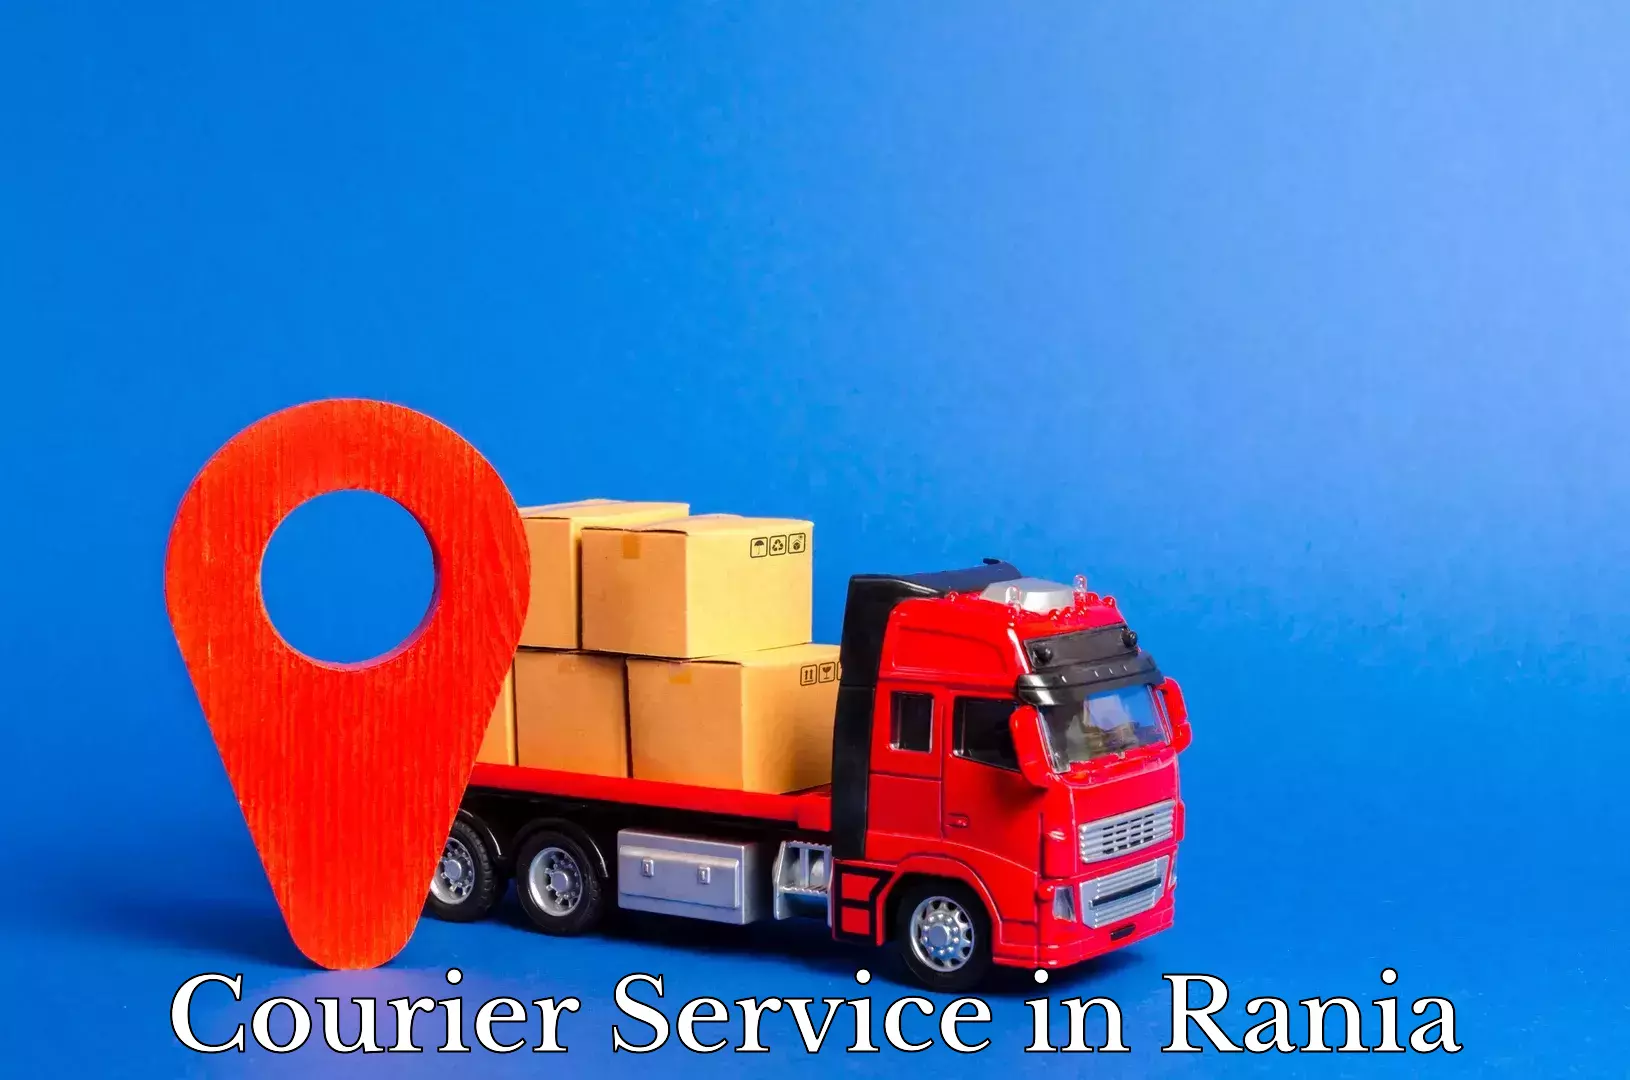 Emergency parcel delivery in Rania